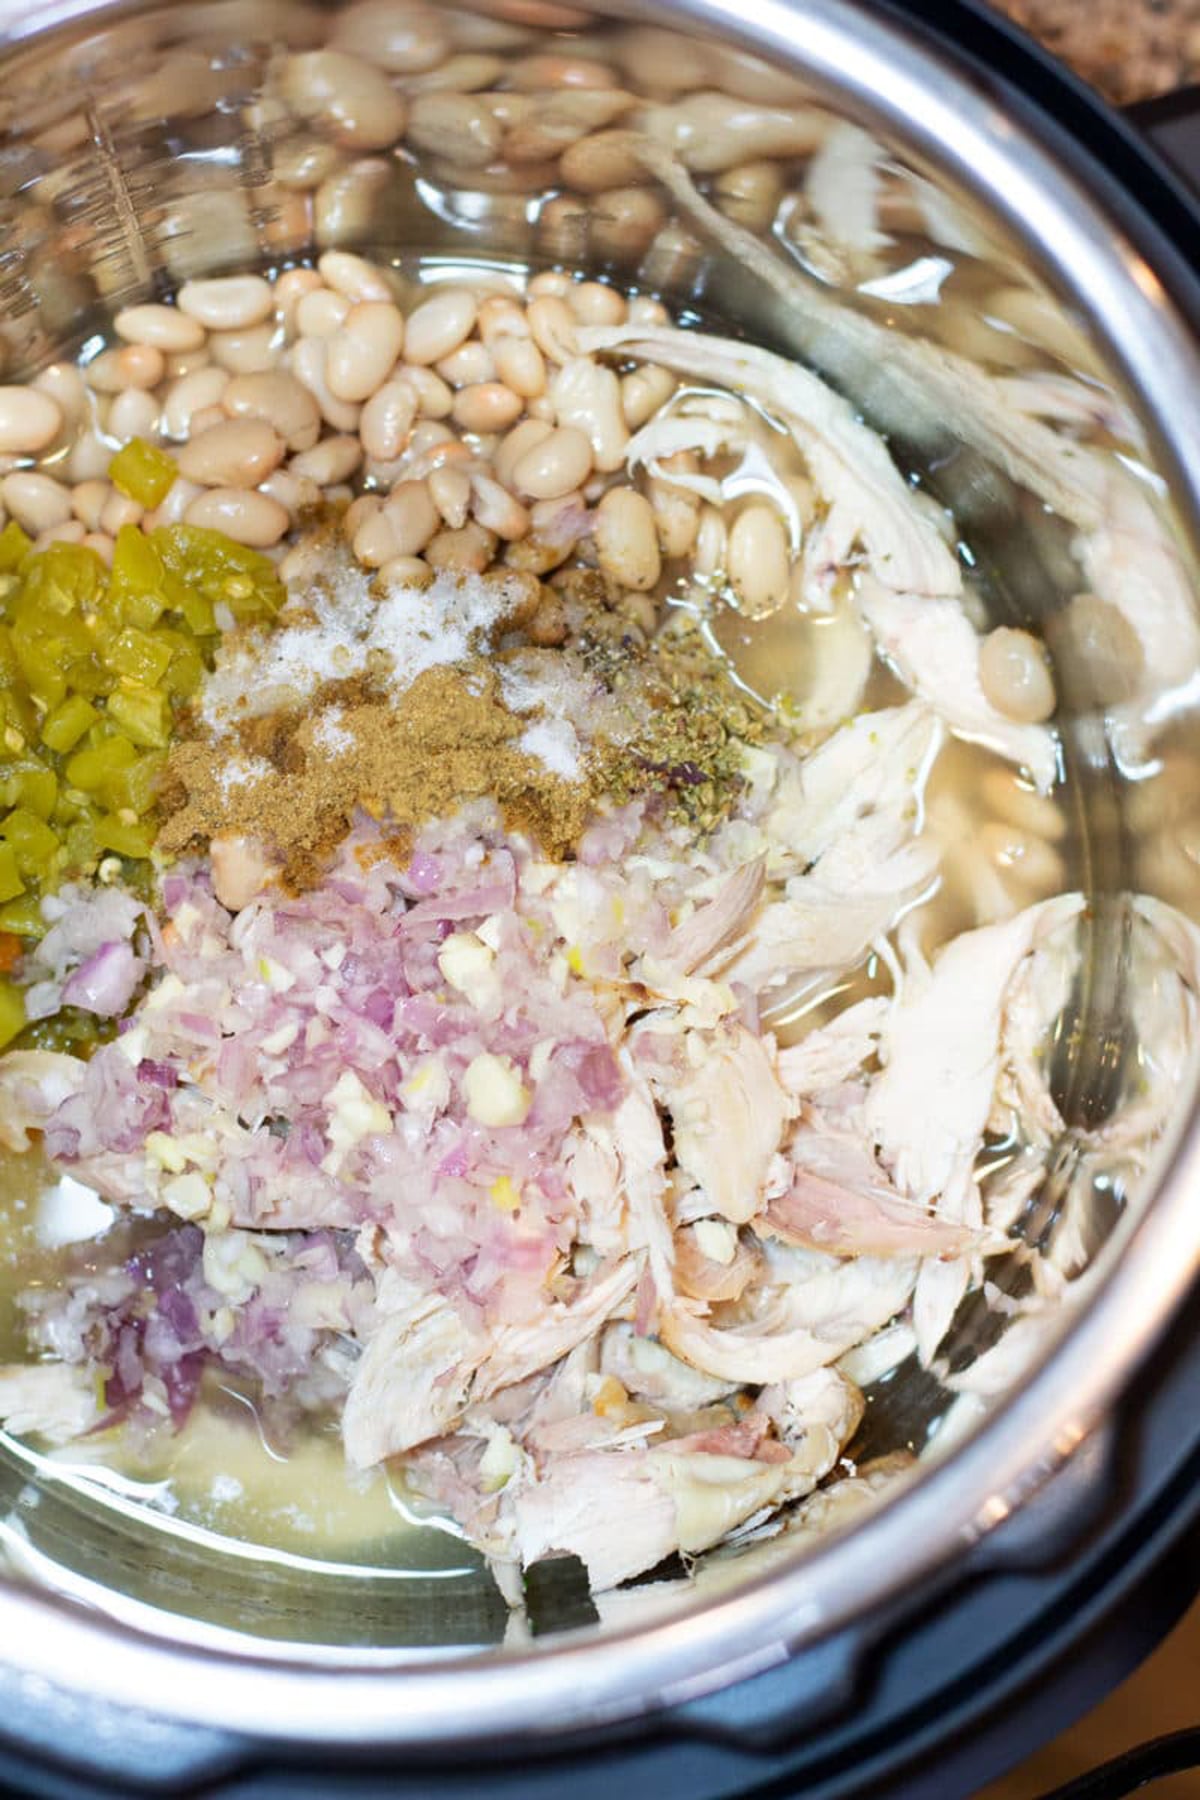 Instant Pot containing white beans, shredded chicken, green chilis, shallot and seasonings.